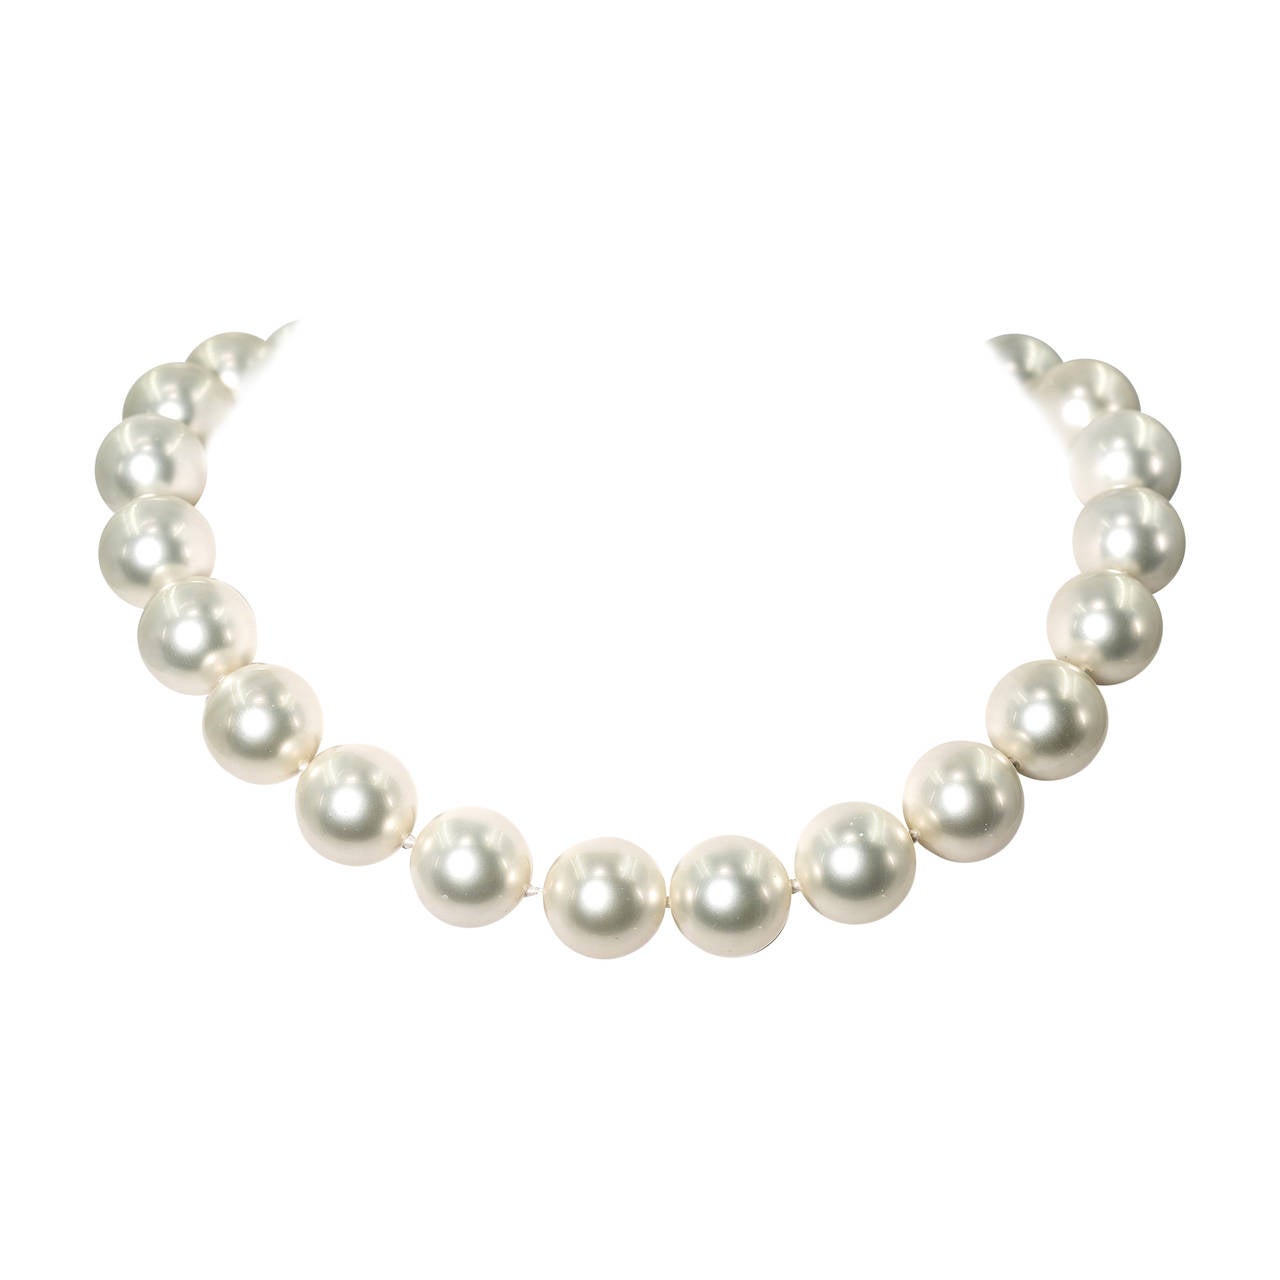 Faux 16mm South Sea Pearl Necklace